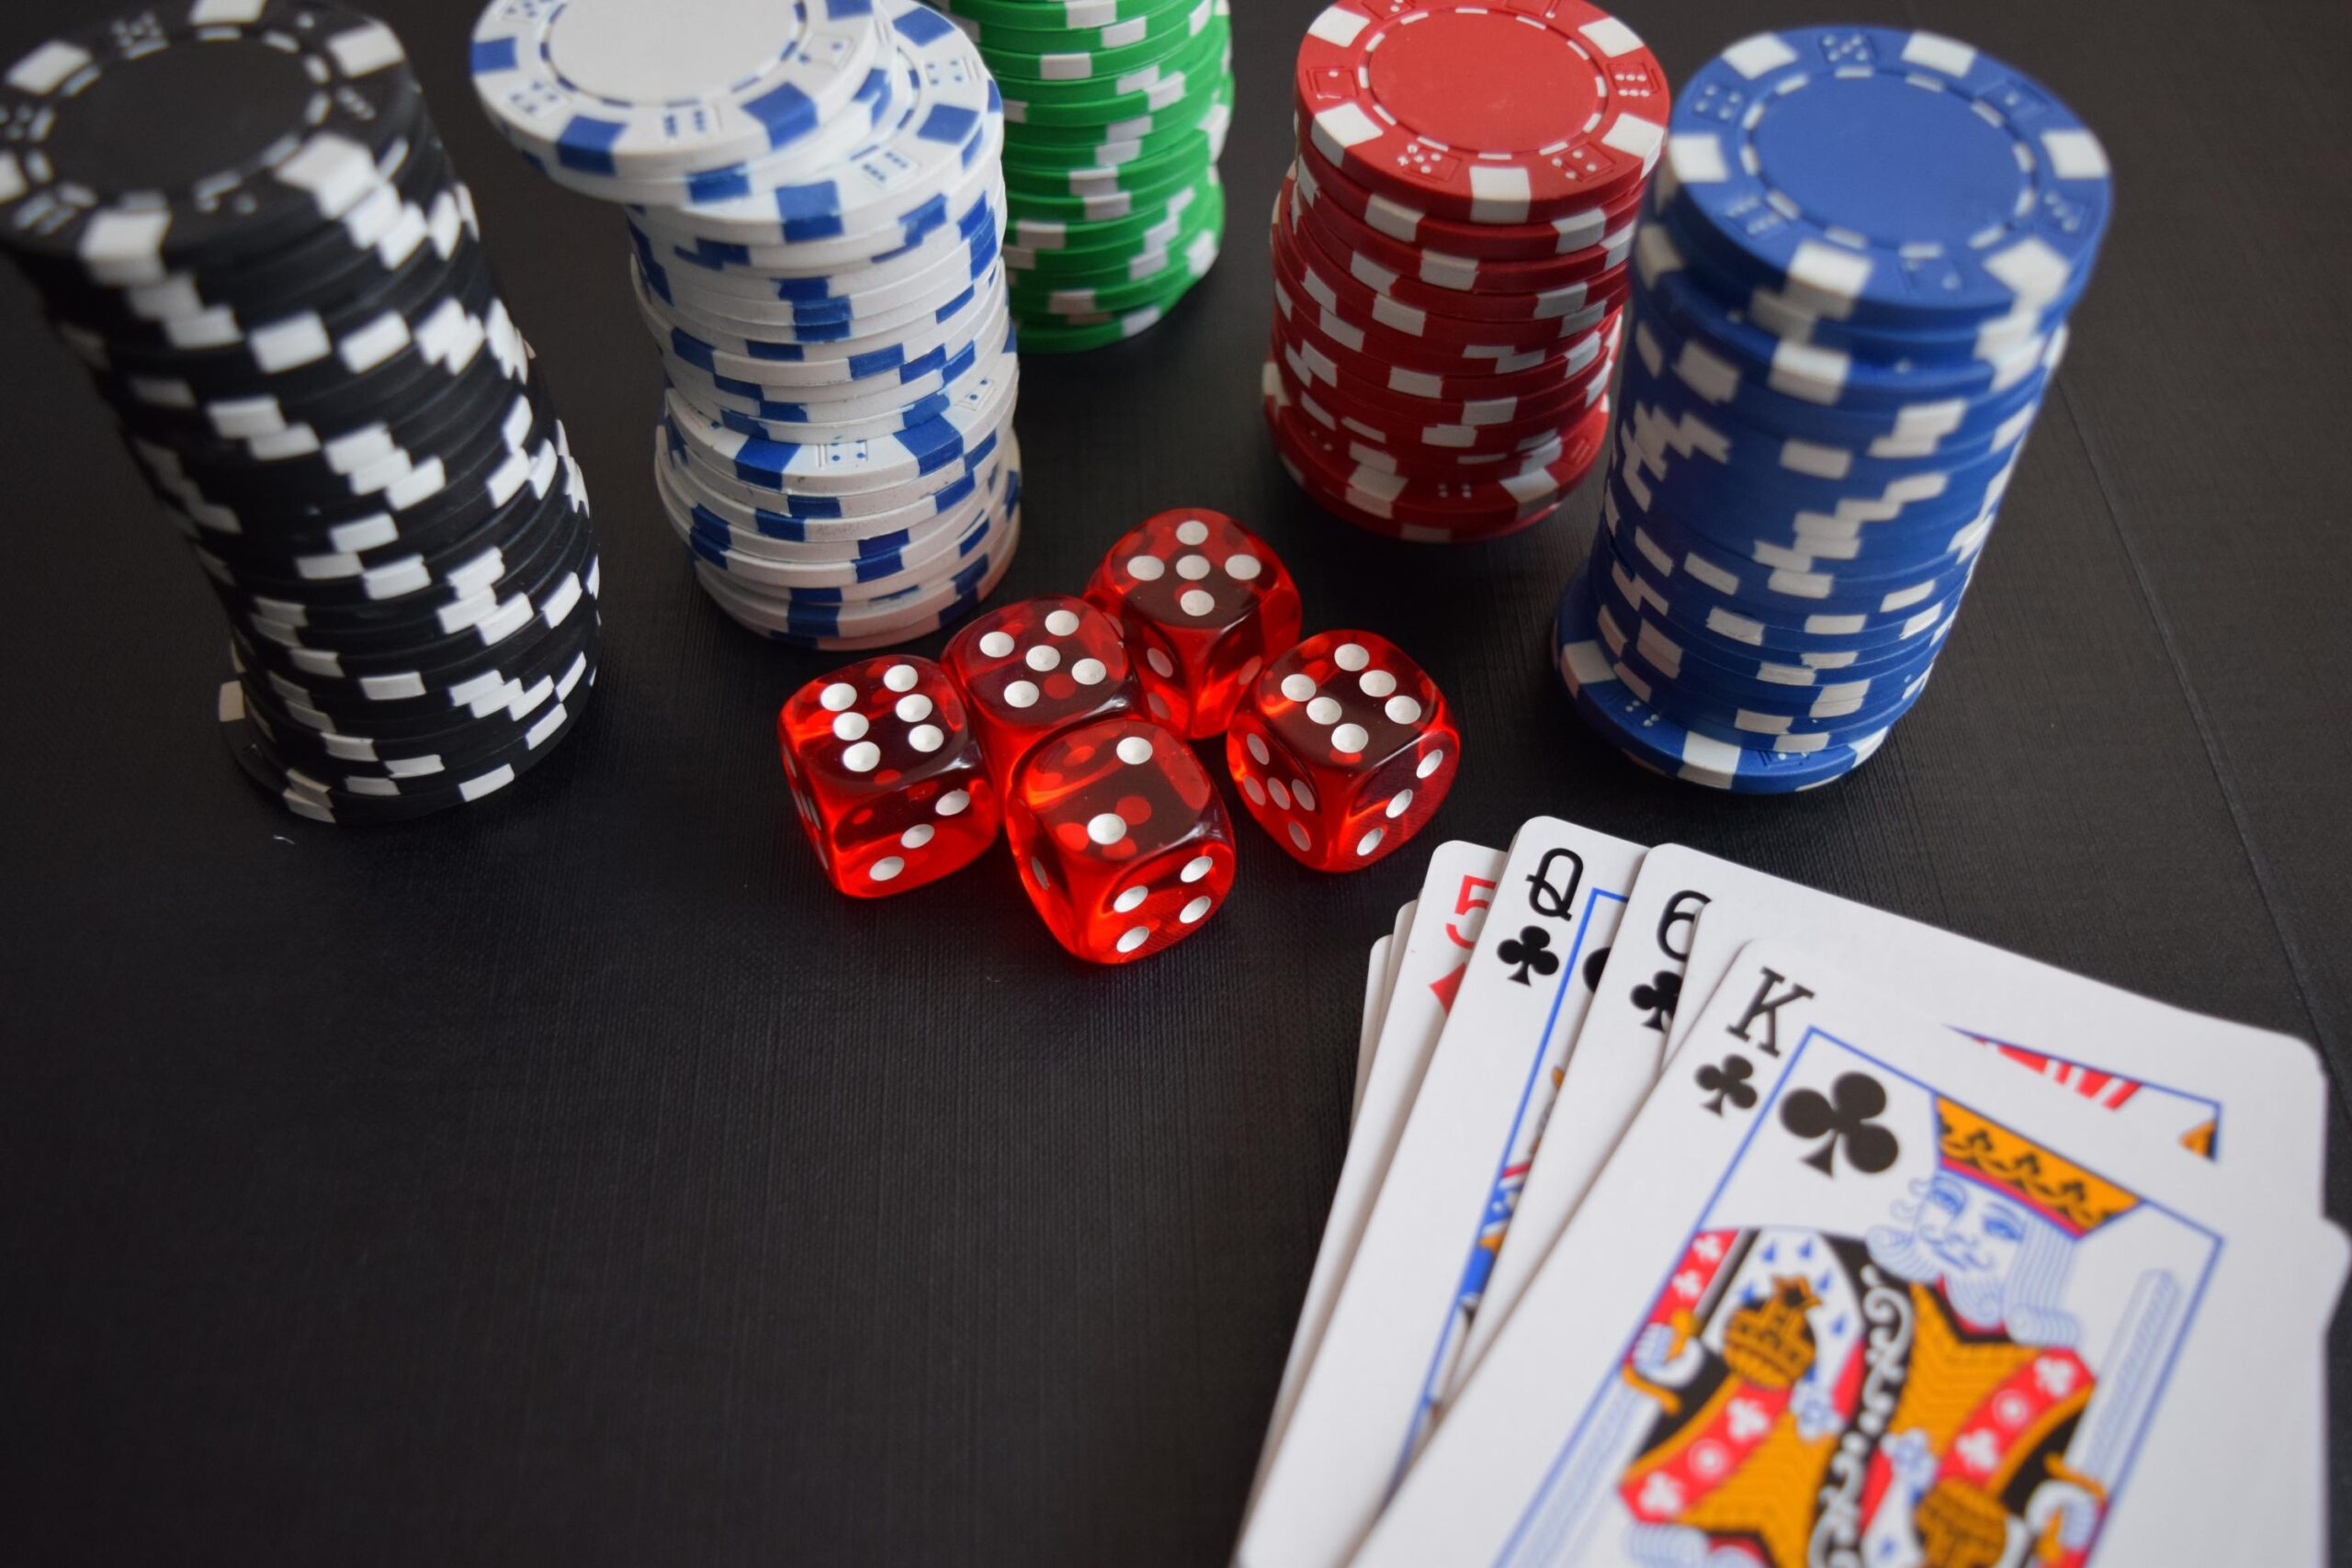 What are the top 10 examples of gambling companies promoting diversity and inclusion?